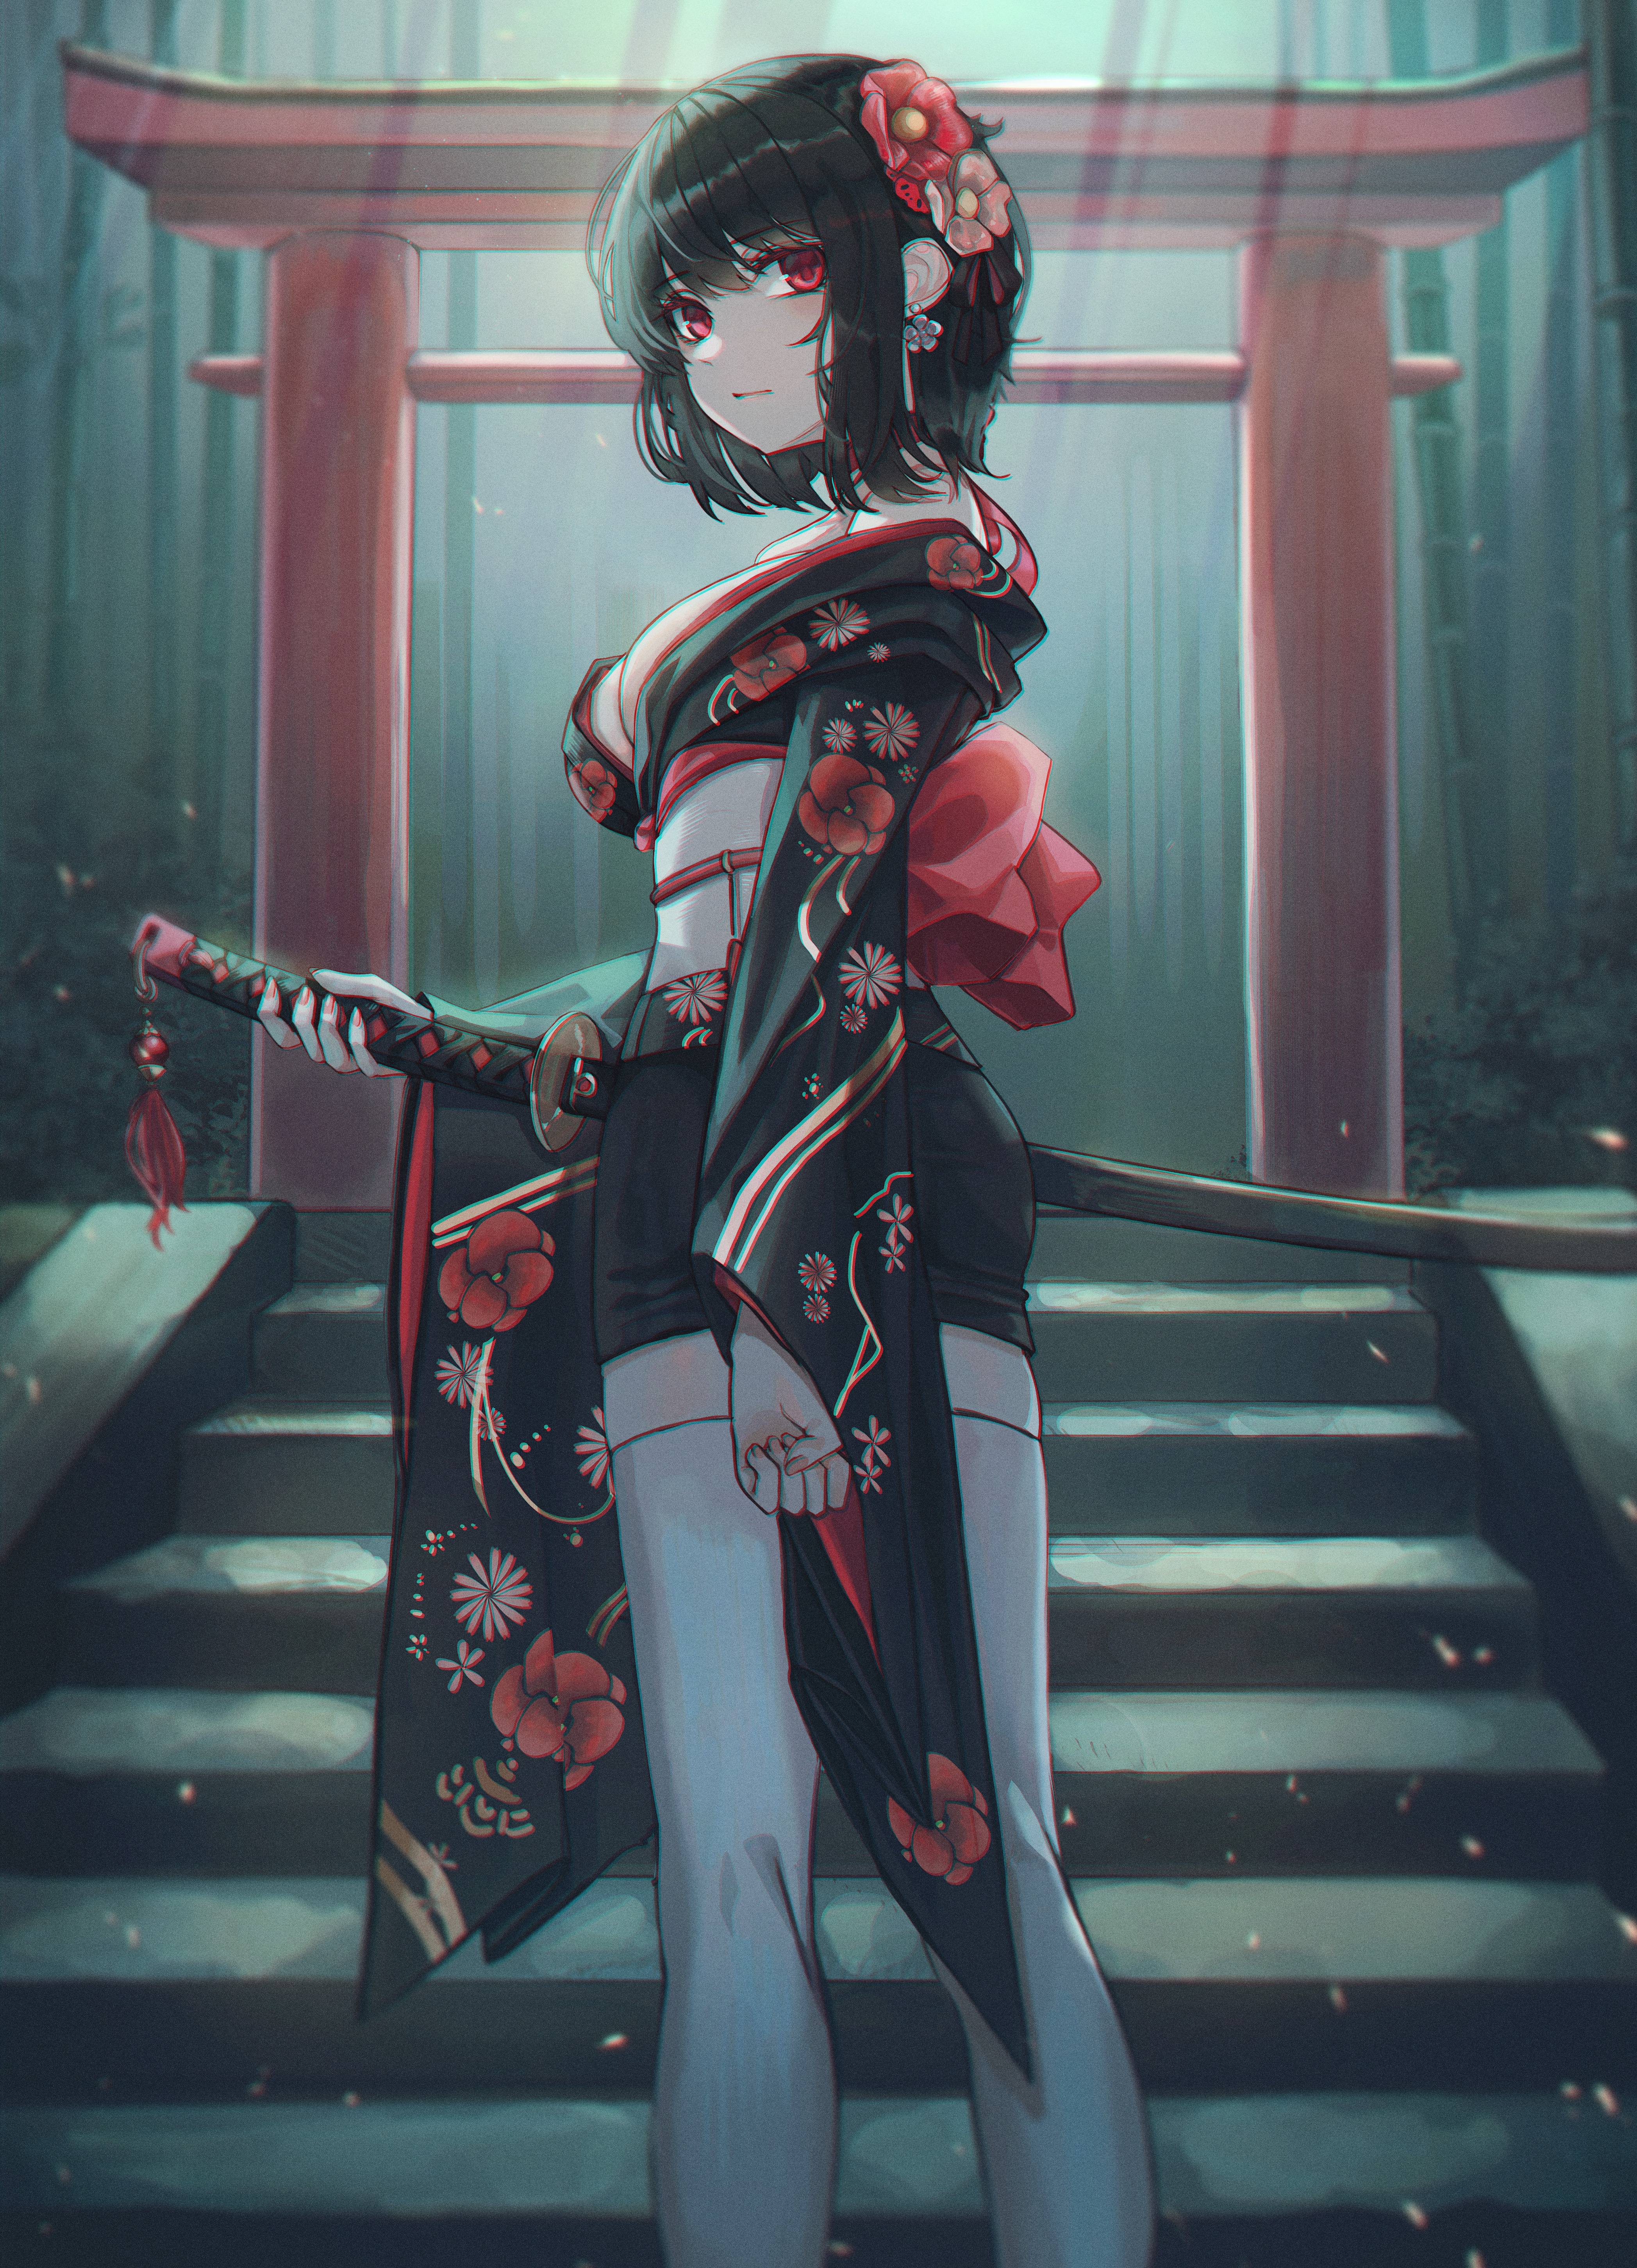 Anime 4191x5806 anime anime girls artwork black hair Japanese clothes katana torii cleavage sword women with swords flower in hair boobs stockings looking at viewer painted nails shoulder length hair